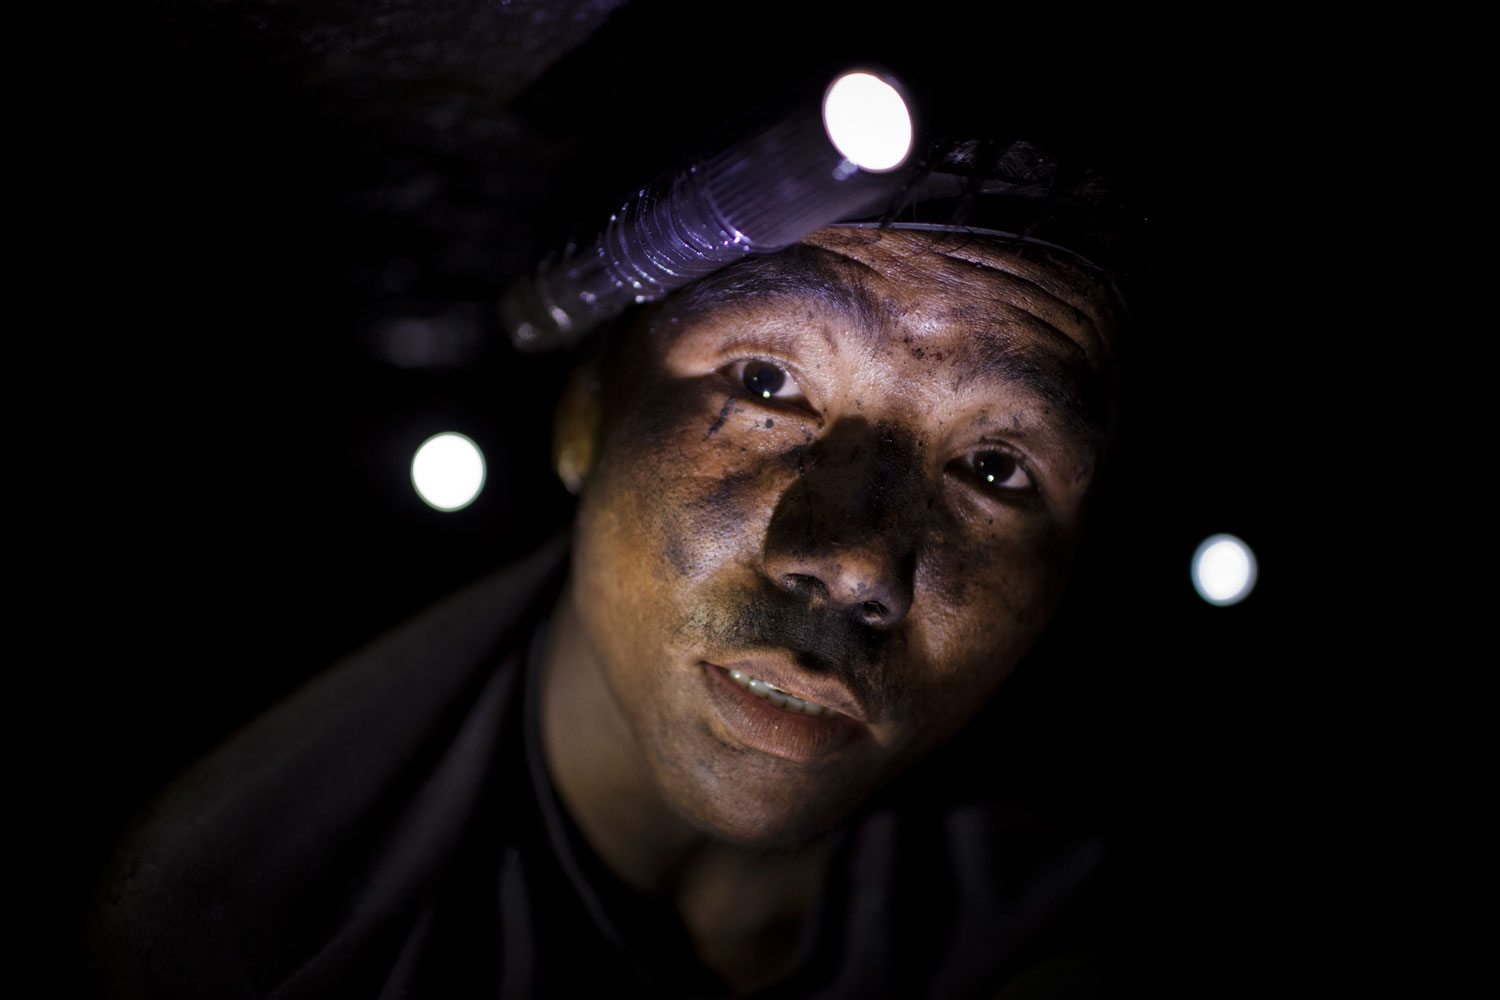 22 year old Shyam Rai from Nepal pauses as he works, digging out coal, using hands and a pick to get at the seams of coal.